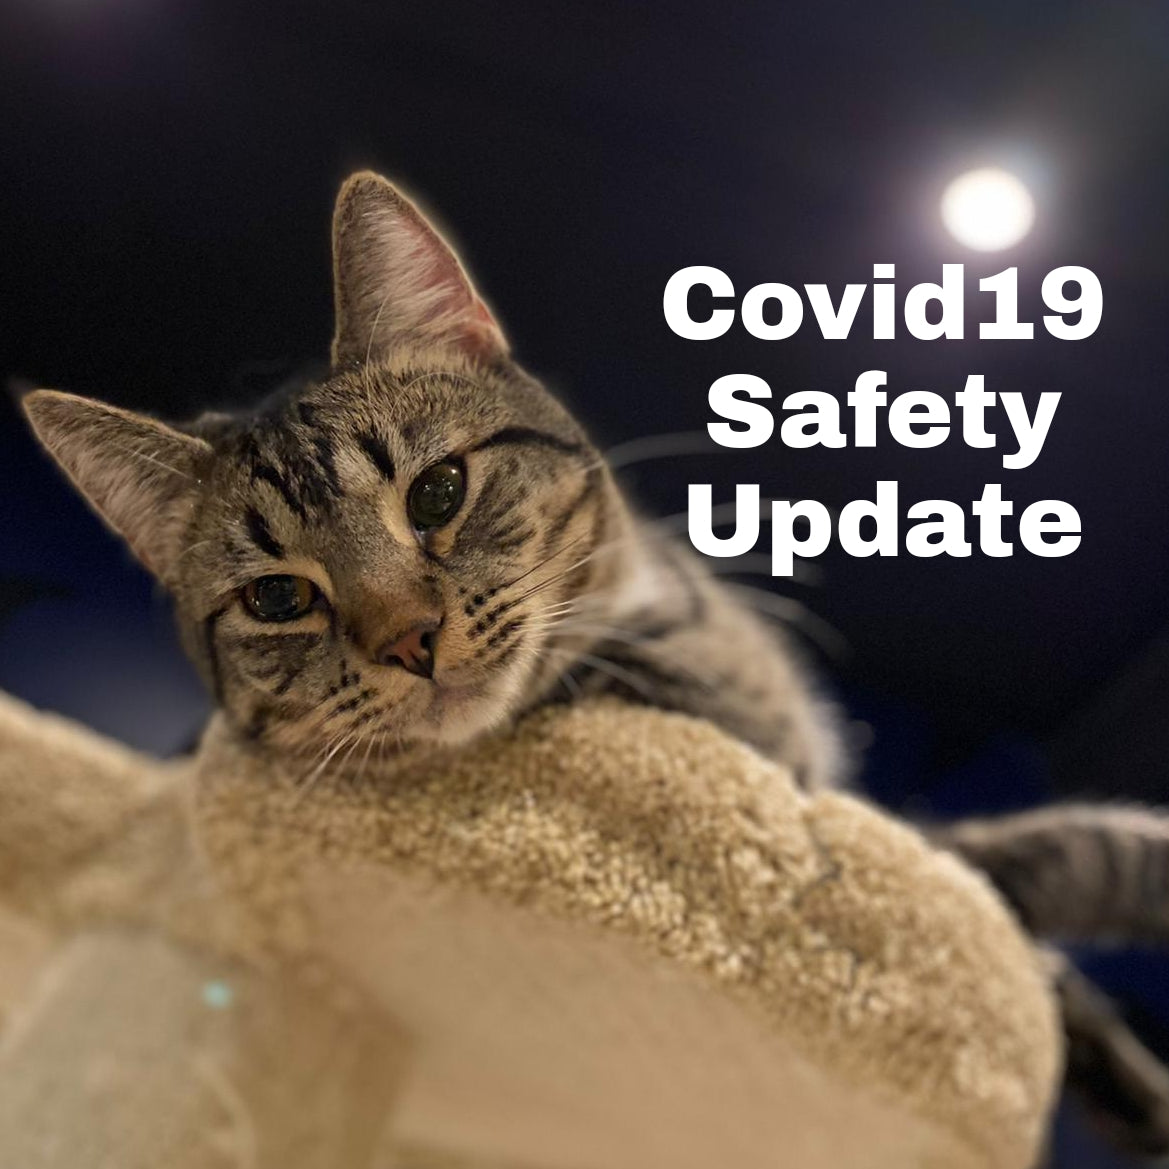 Covid19 Safety Update (November 8th 2020)